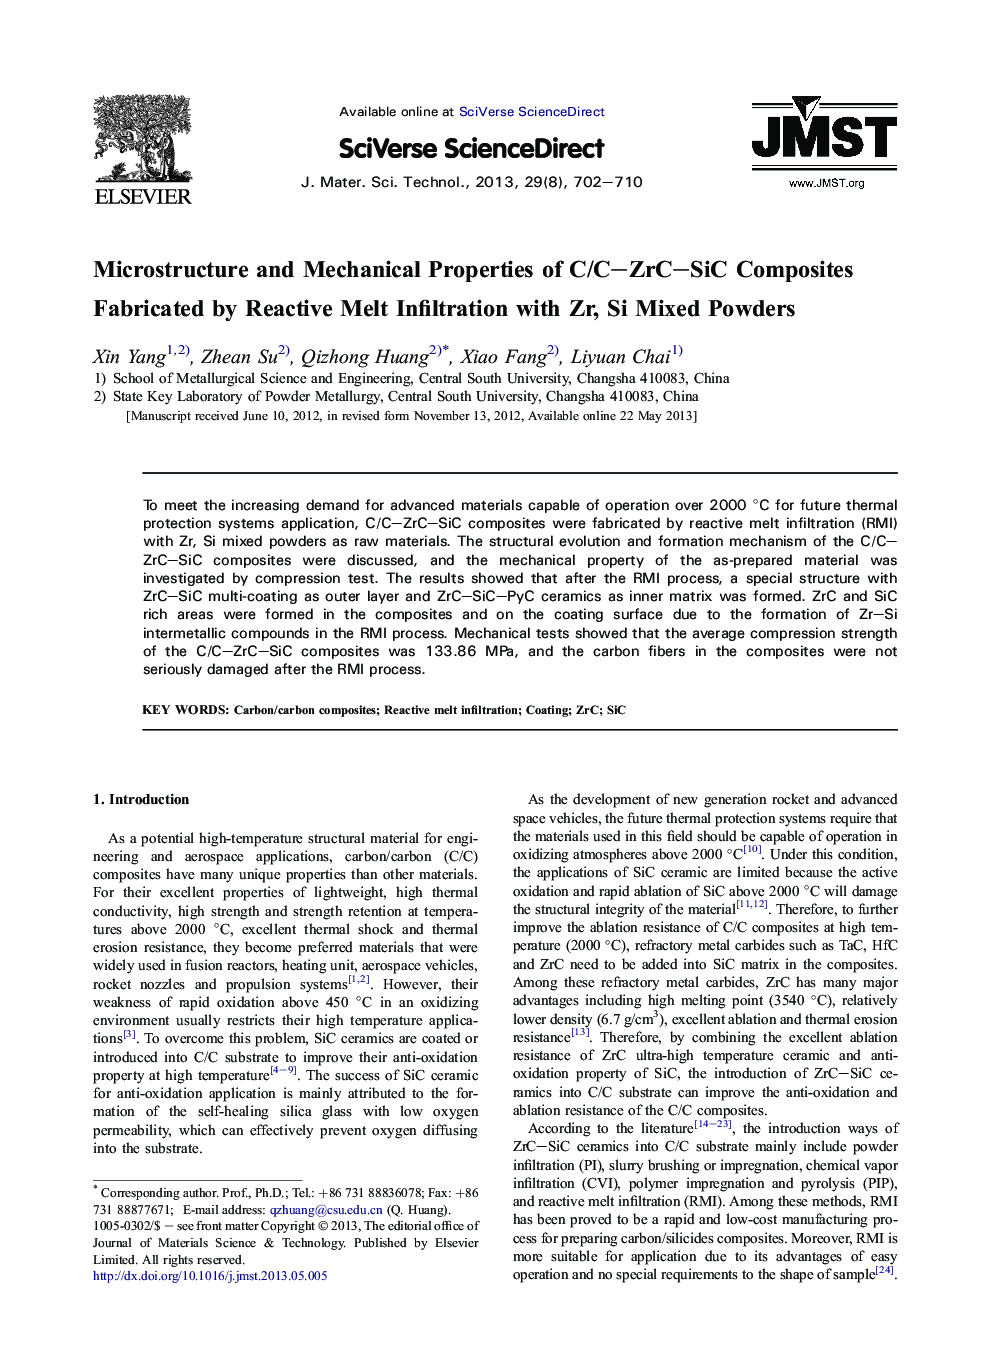 Microstructure and Mechanical Properties of C/C-ZrC-SiC Composites Fabricated by Reactive Melt Infiltration with Zr, Si Mixed Powders